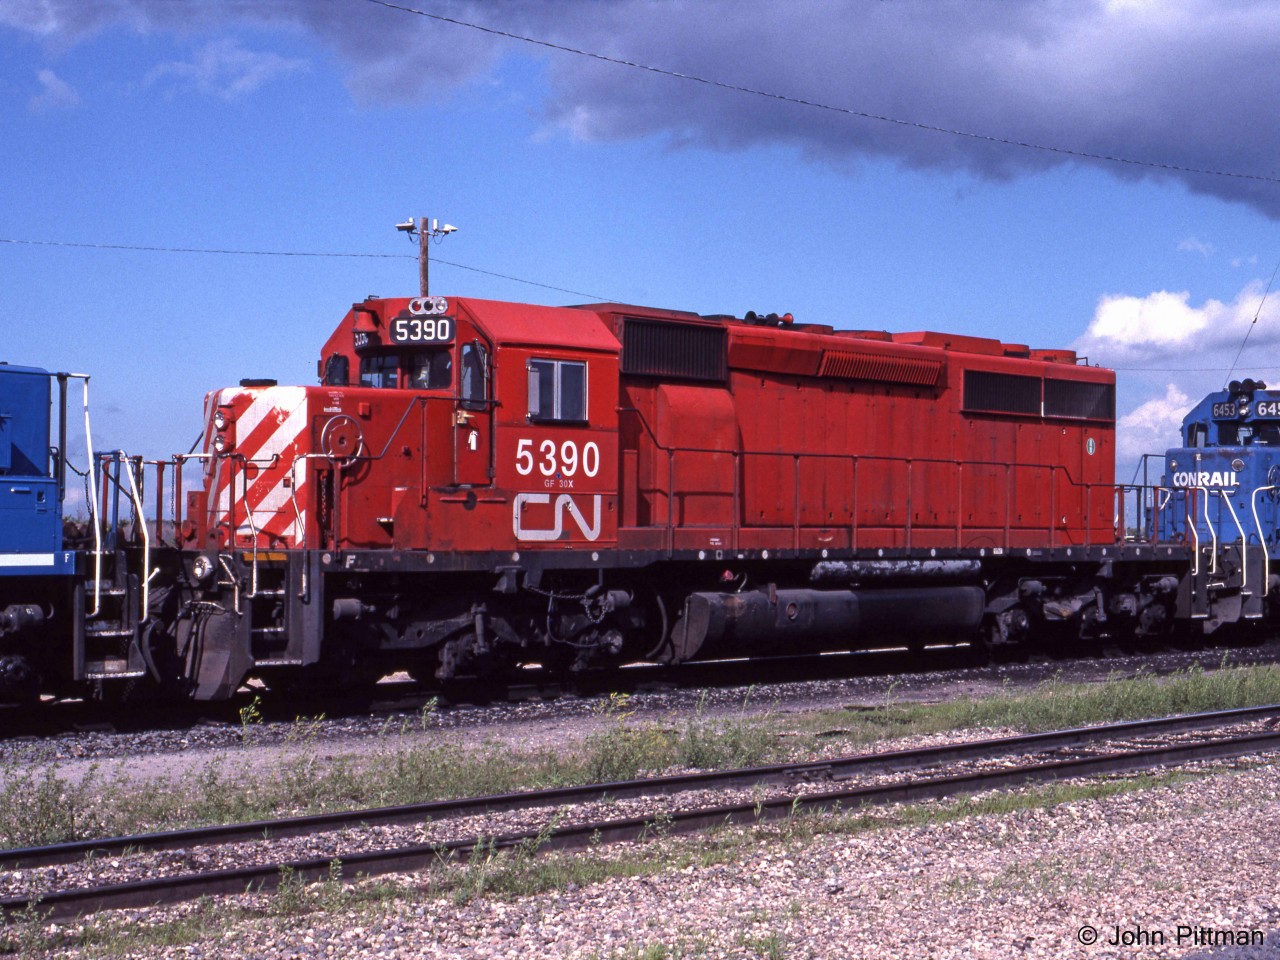 CN 5390, an Ontario Hydro owned SD40-2 formerly assigned to CP Rail, is one of 11 passed to CN along with O.H.'s coal hauling business. My source indicates CN 5390 was formerly CP 5781. Traces of a multimark can be seen around the radiator intake grilles. 
It is resting outside the Symington Yard Diesel Shop in eastern Winnipeg, sandwiched between Conrail units CR 6662 and CR 6453. It could be used on any train systemwide. CP re-acquired 10 of them in year 2000. 
For a while after privatization, it was sometimes still possible to obtain permission to visit CN facilities and take photographs. Sincere thanks to the people who authorized me, I hope there were no downsides for you.